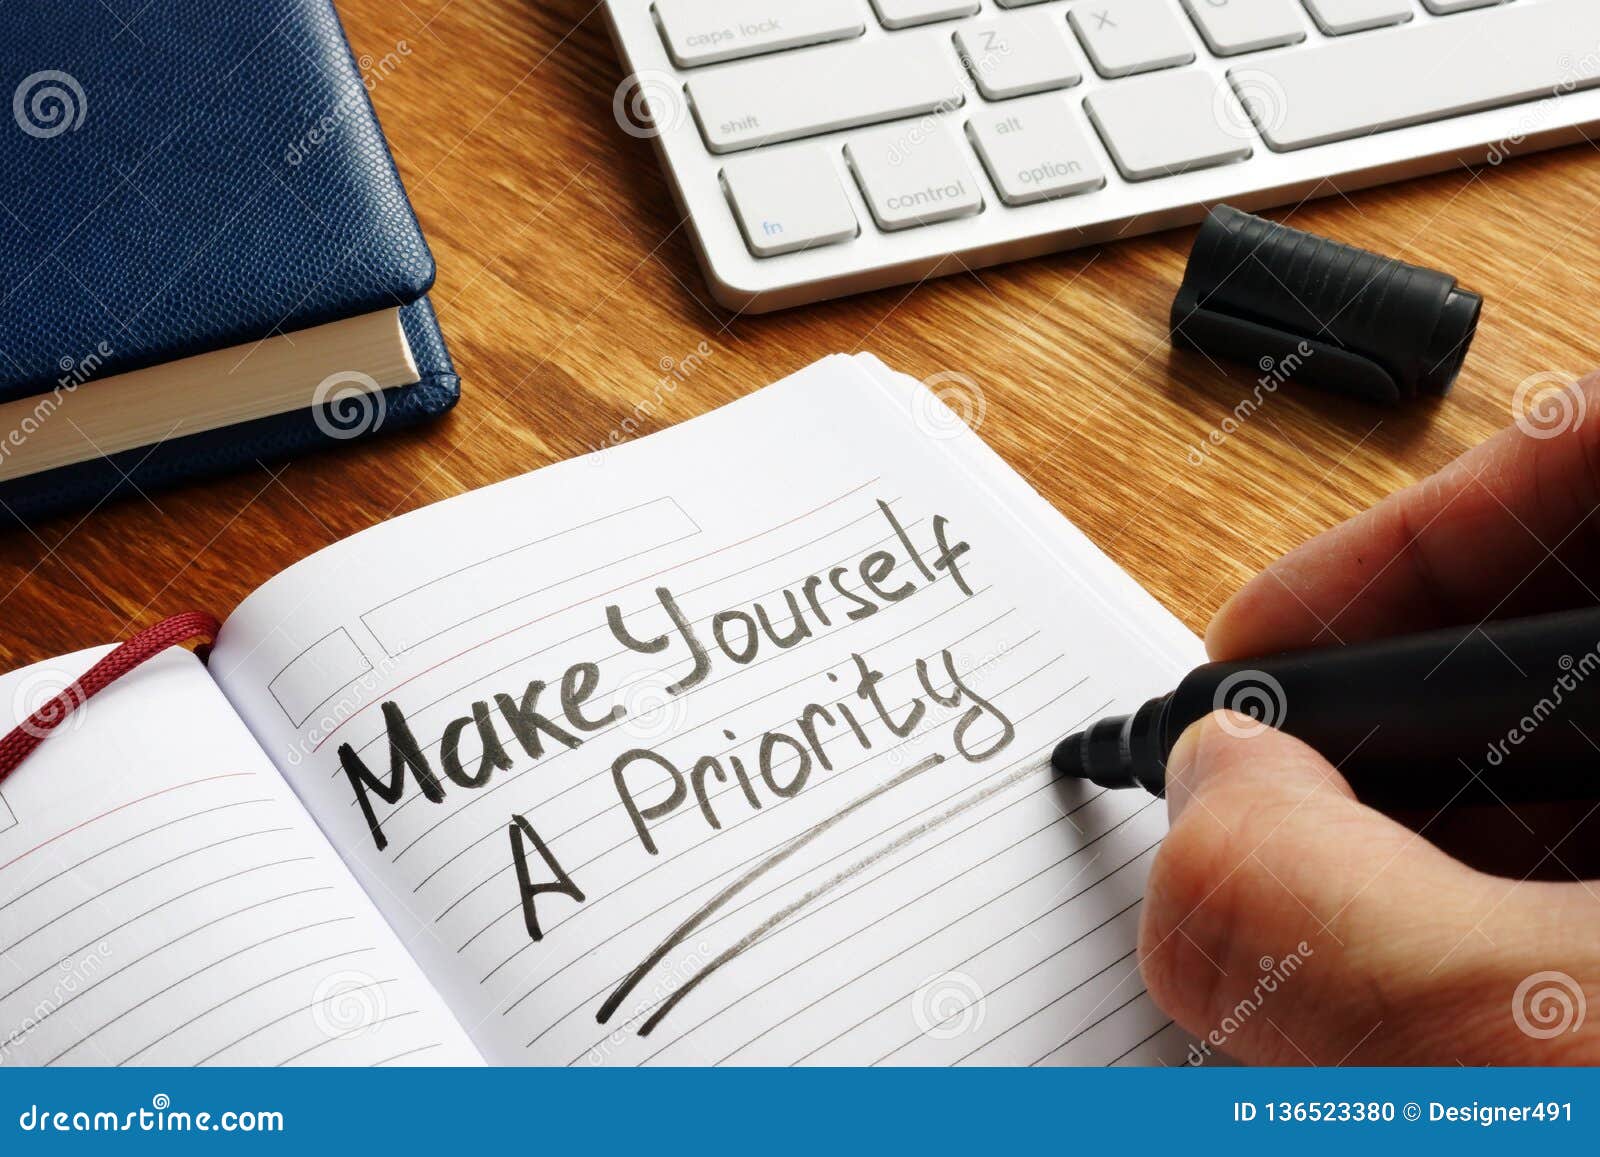 man is writing make yourself a priority